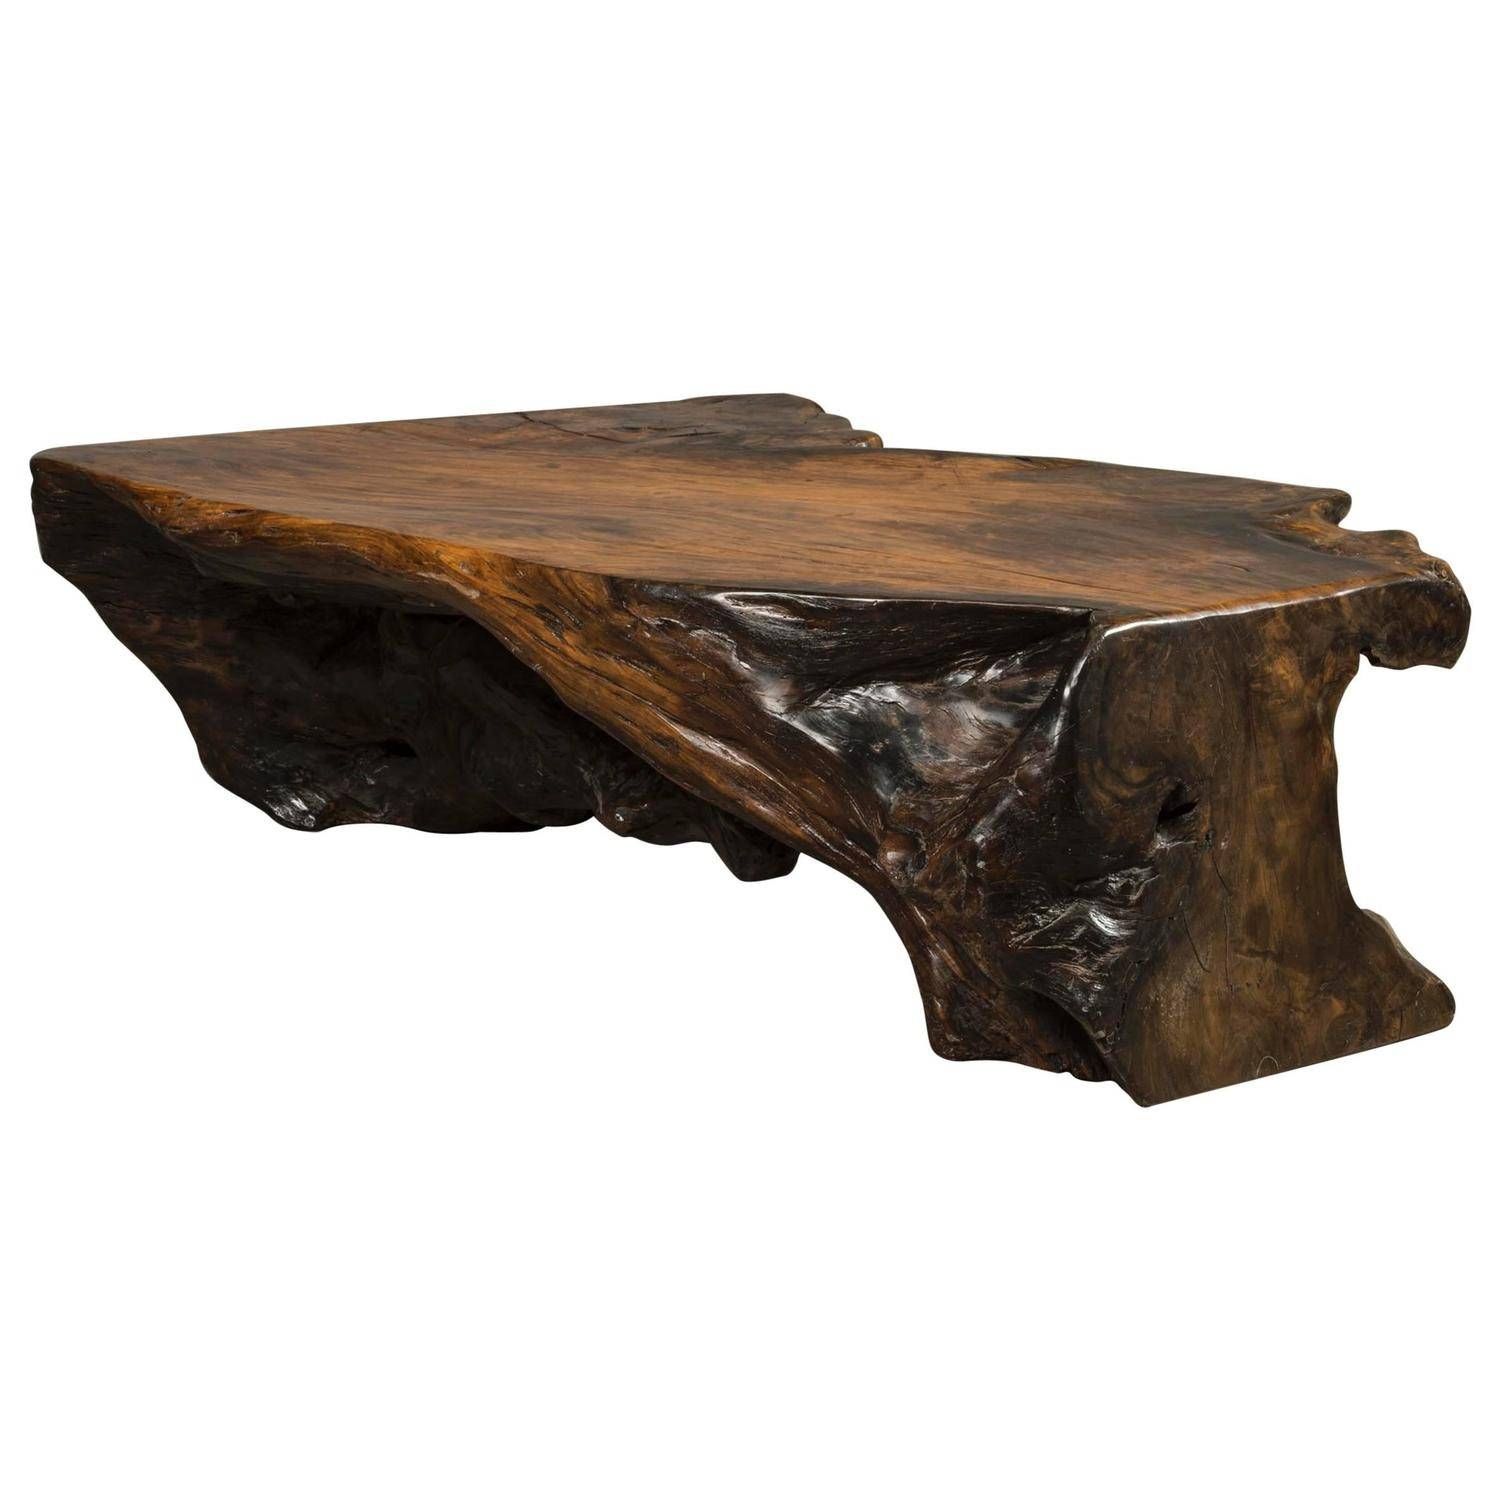 Coffee Table, Free Form, Made Of Narra Root Wood For Sale At 1stdibs With Regard To Free Form Coffee Tables (View 21 of 30)